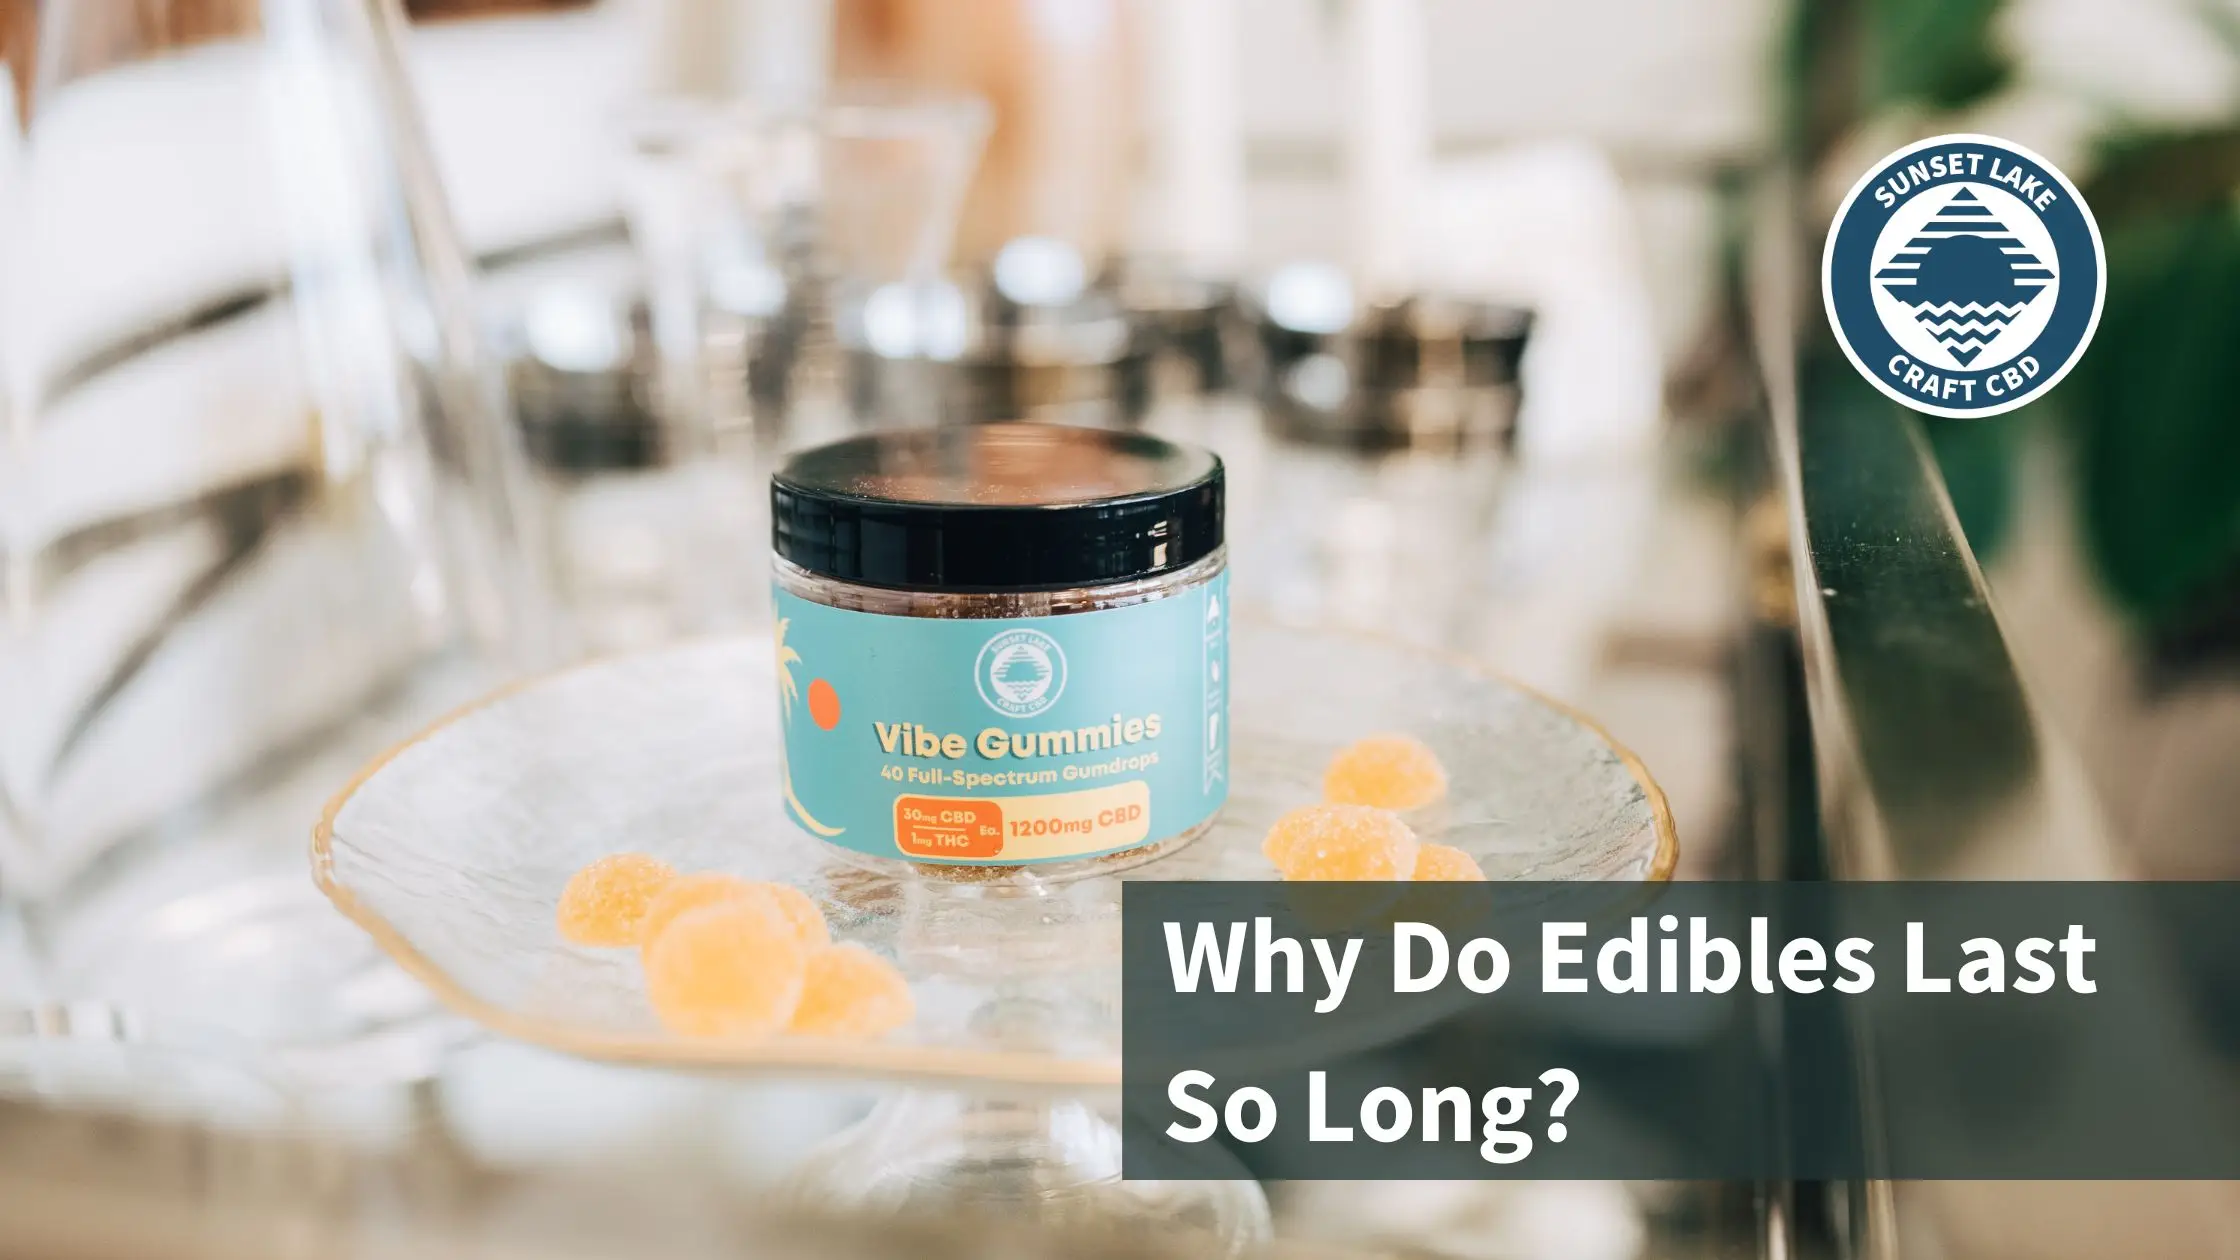 Why Do Edibles Last So Long? Understanding Cannabinoid Digestion